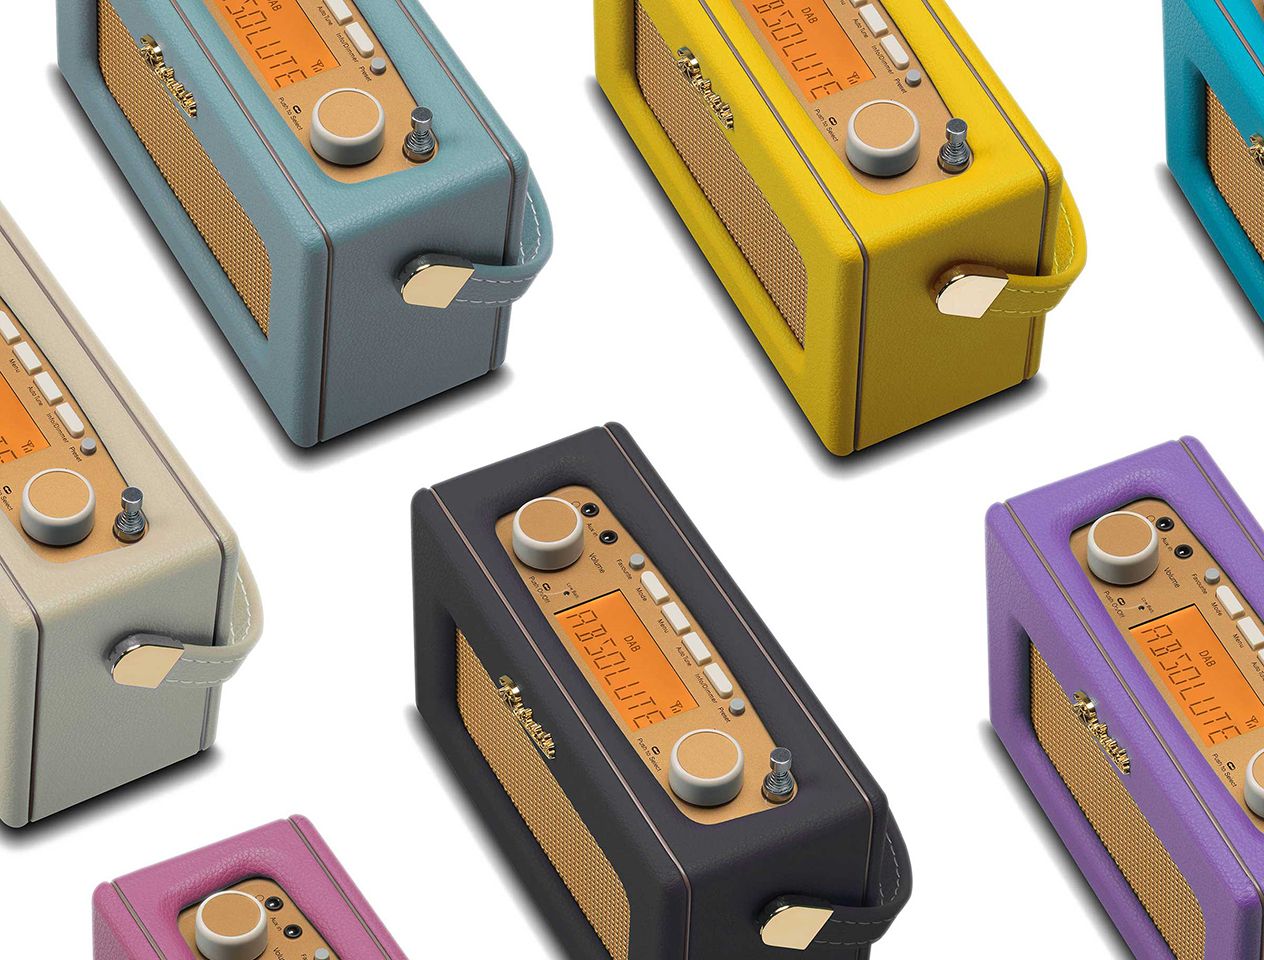 The secret history behind the iconic Roberts Radio brand